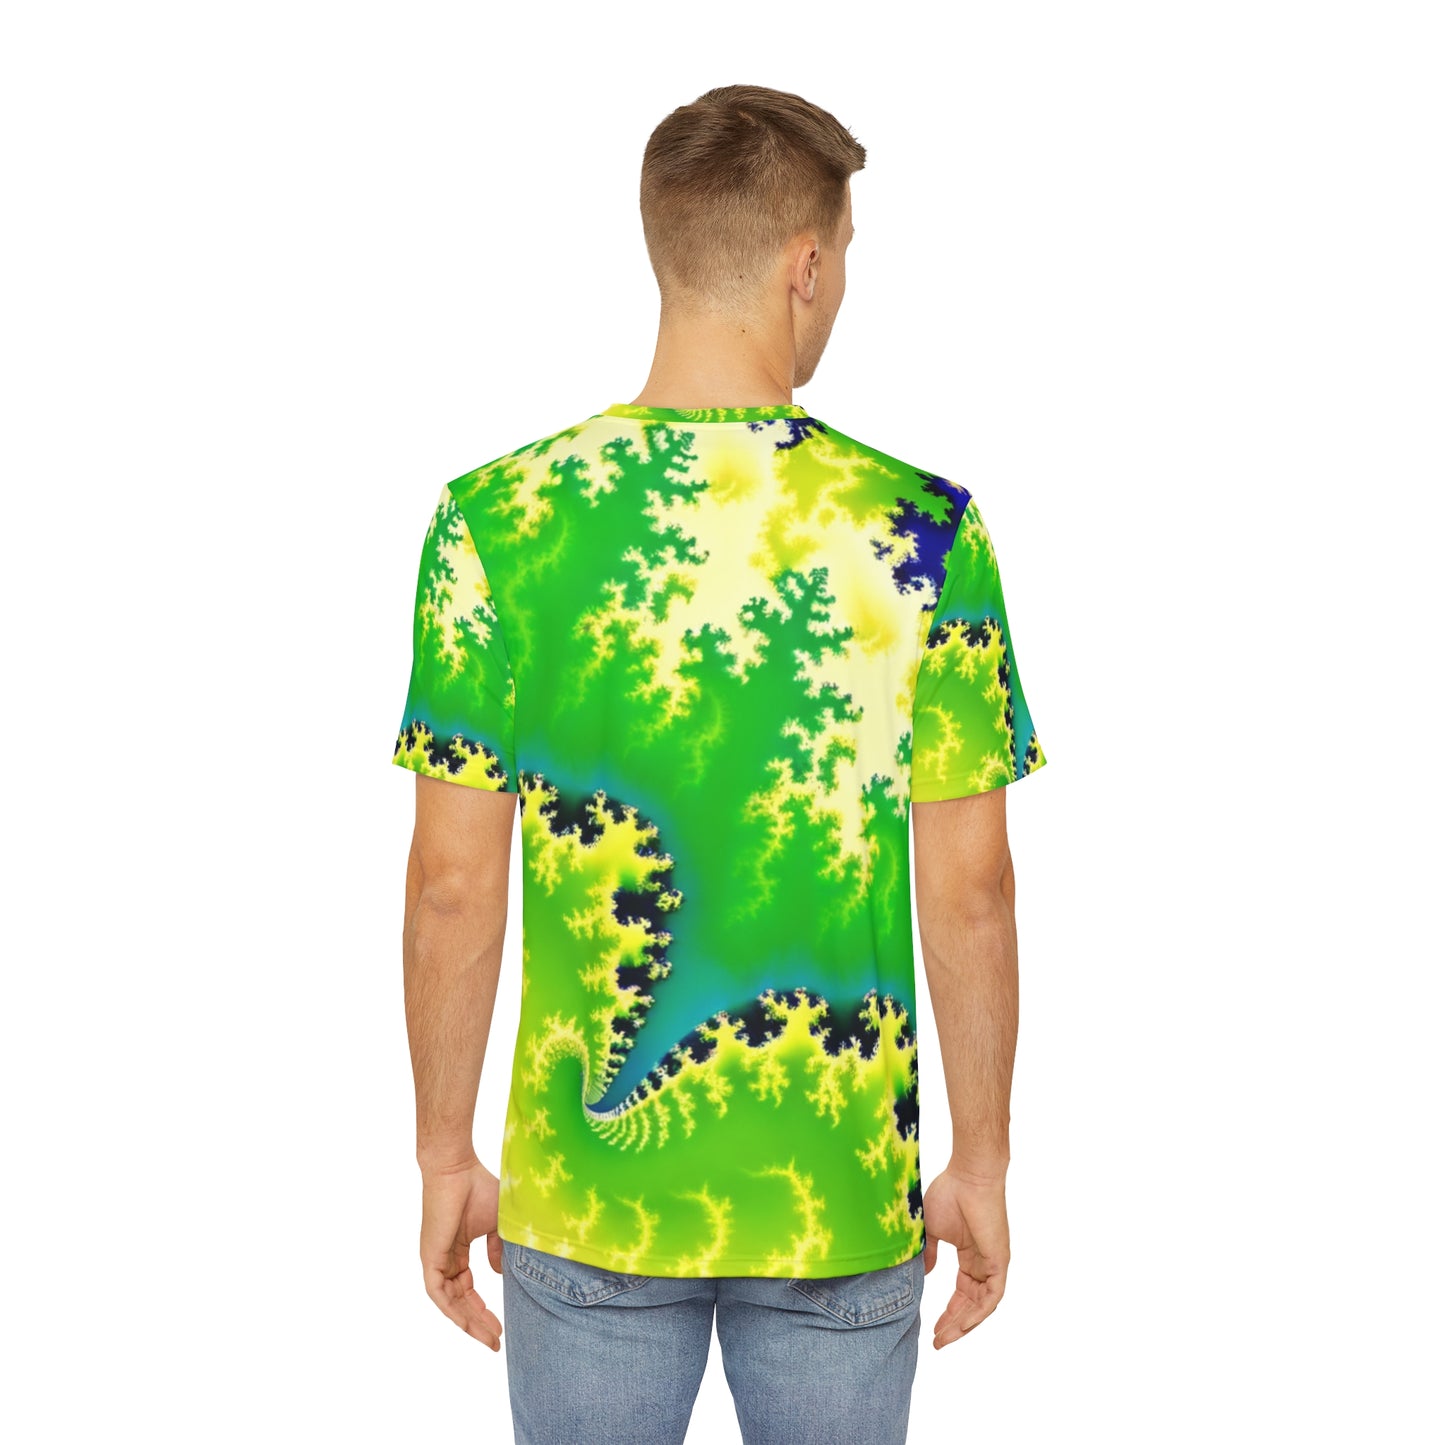 Back view of the Psychedelic Serpentine Fractal Fusion Crewneck Pullover All-Over Print Short-Sleeved Shirt green yellow blue black psychedelic pattern paired with casual denim pants worn by a white man